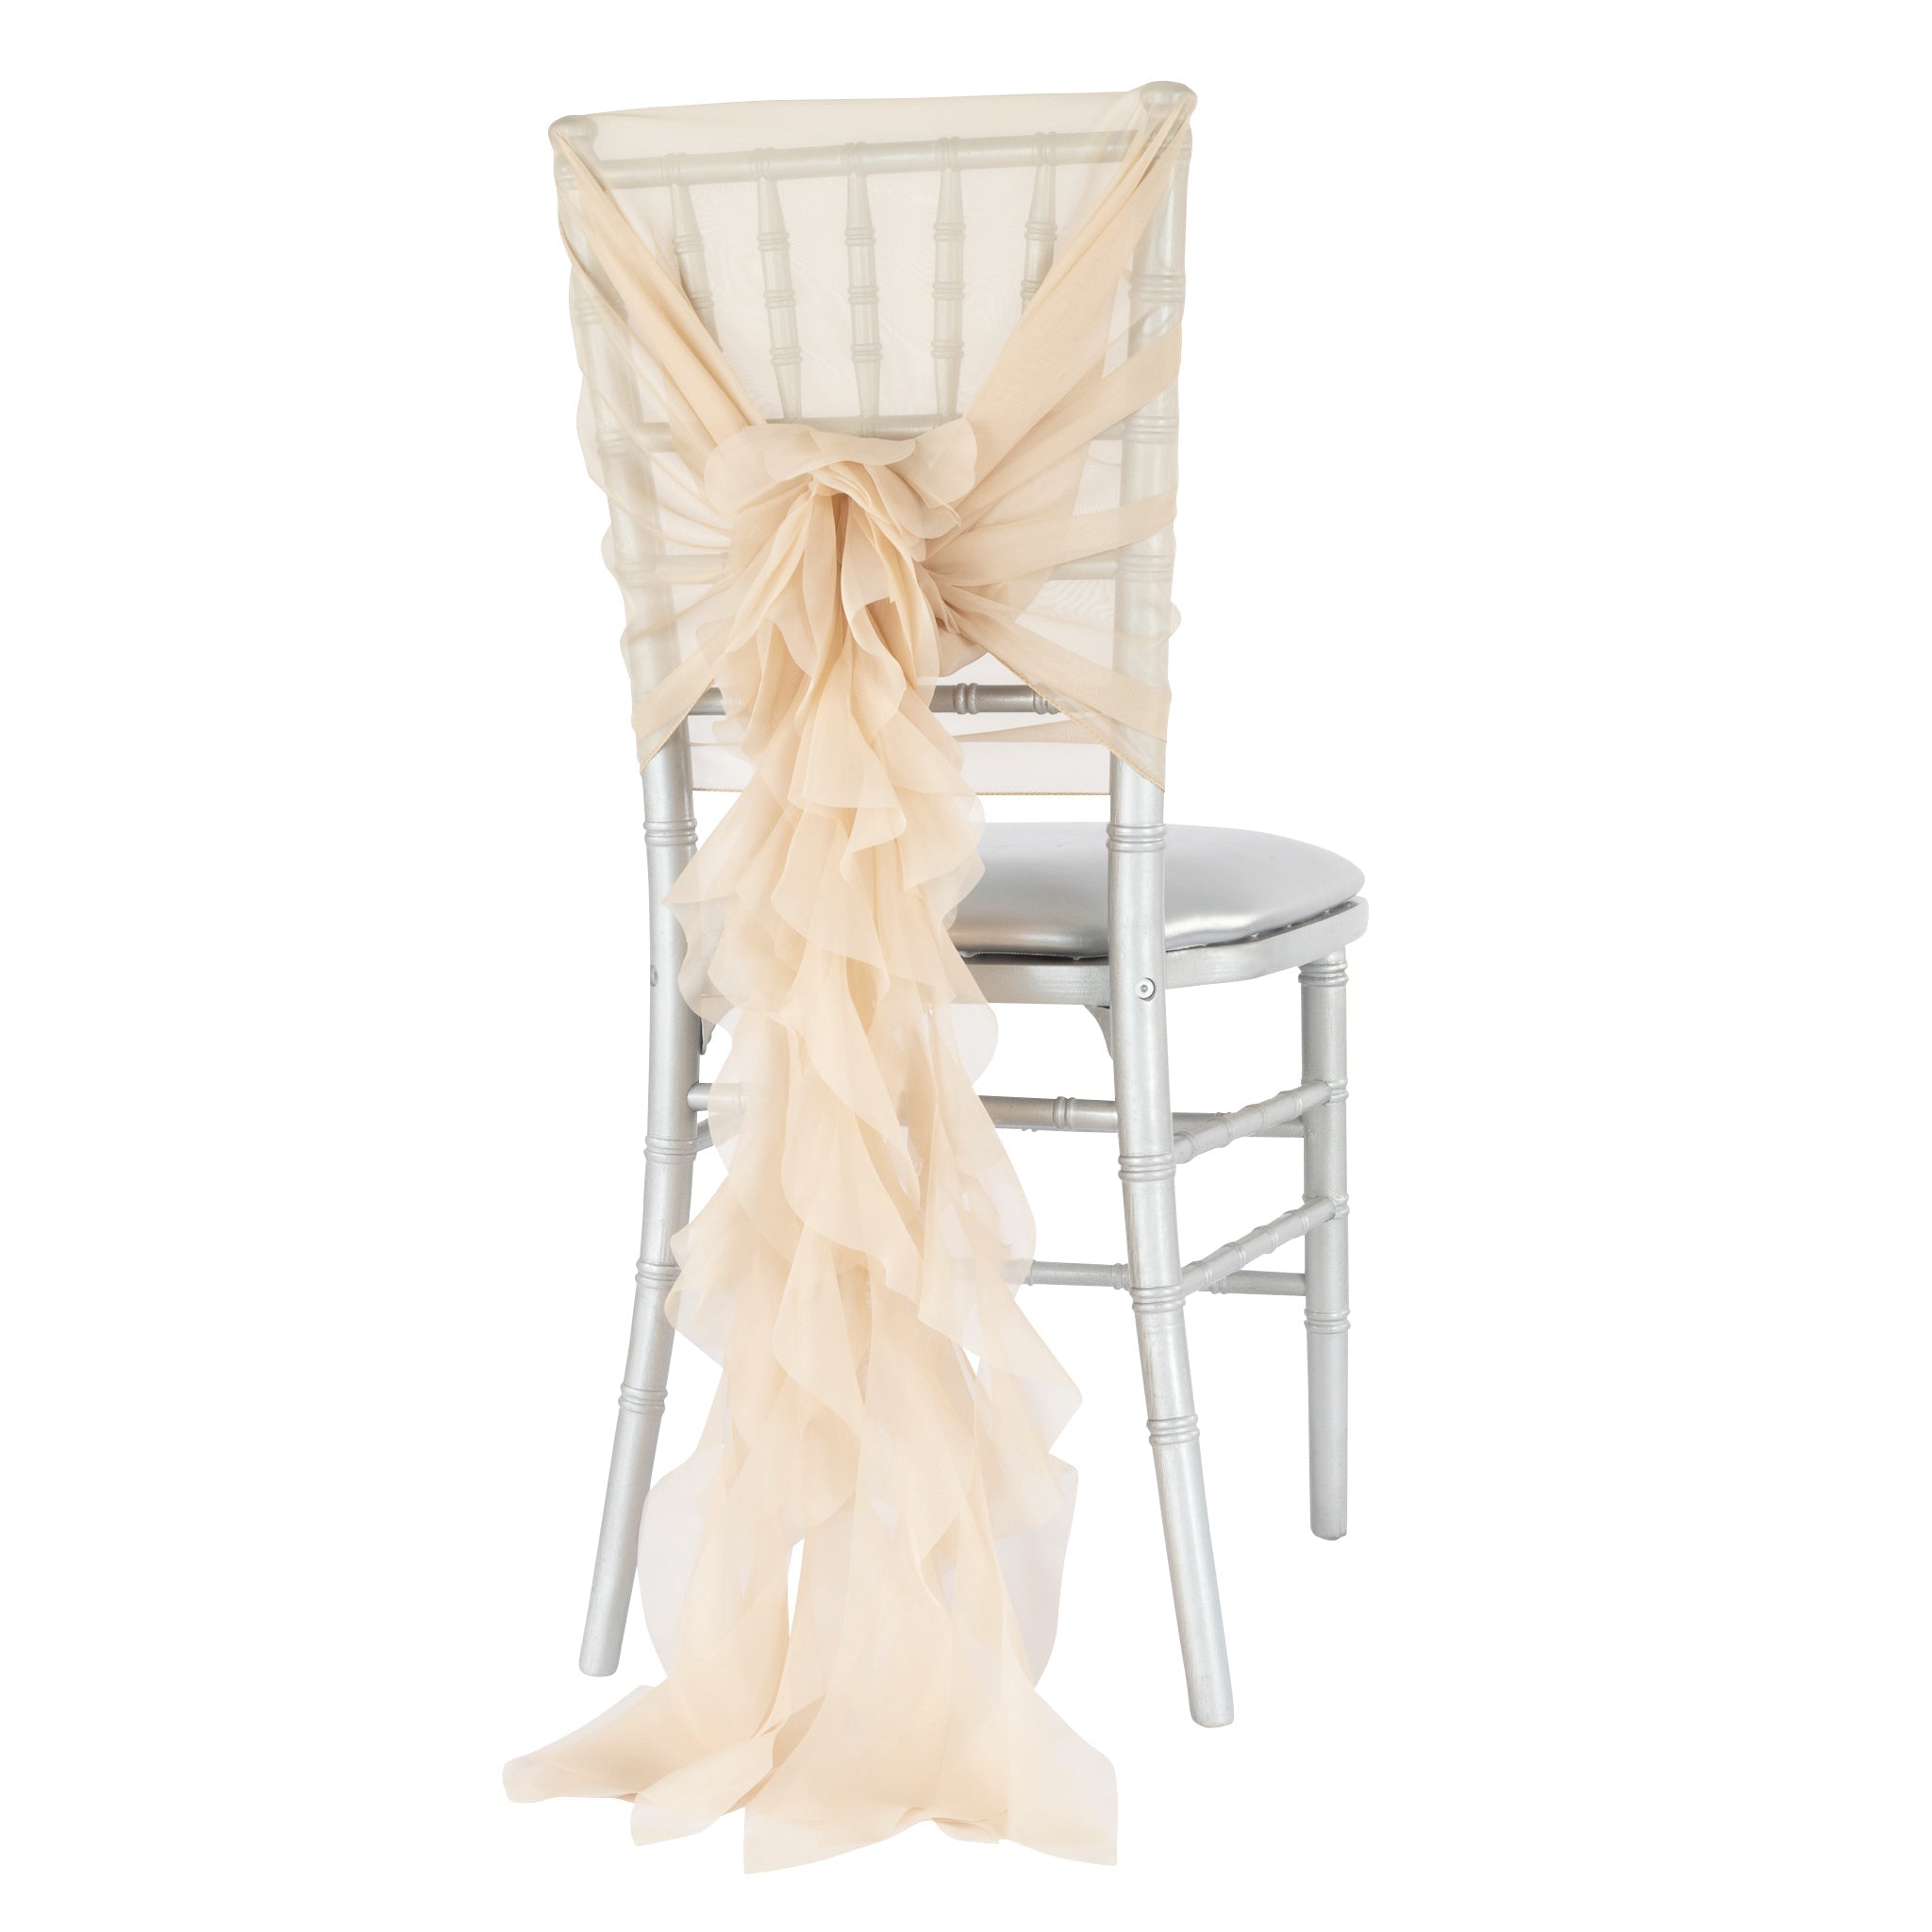 Wholesale 1 Set of Soft Curly Willow Ruffles Chair Sash & Cap